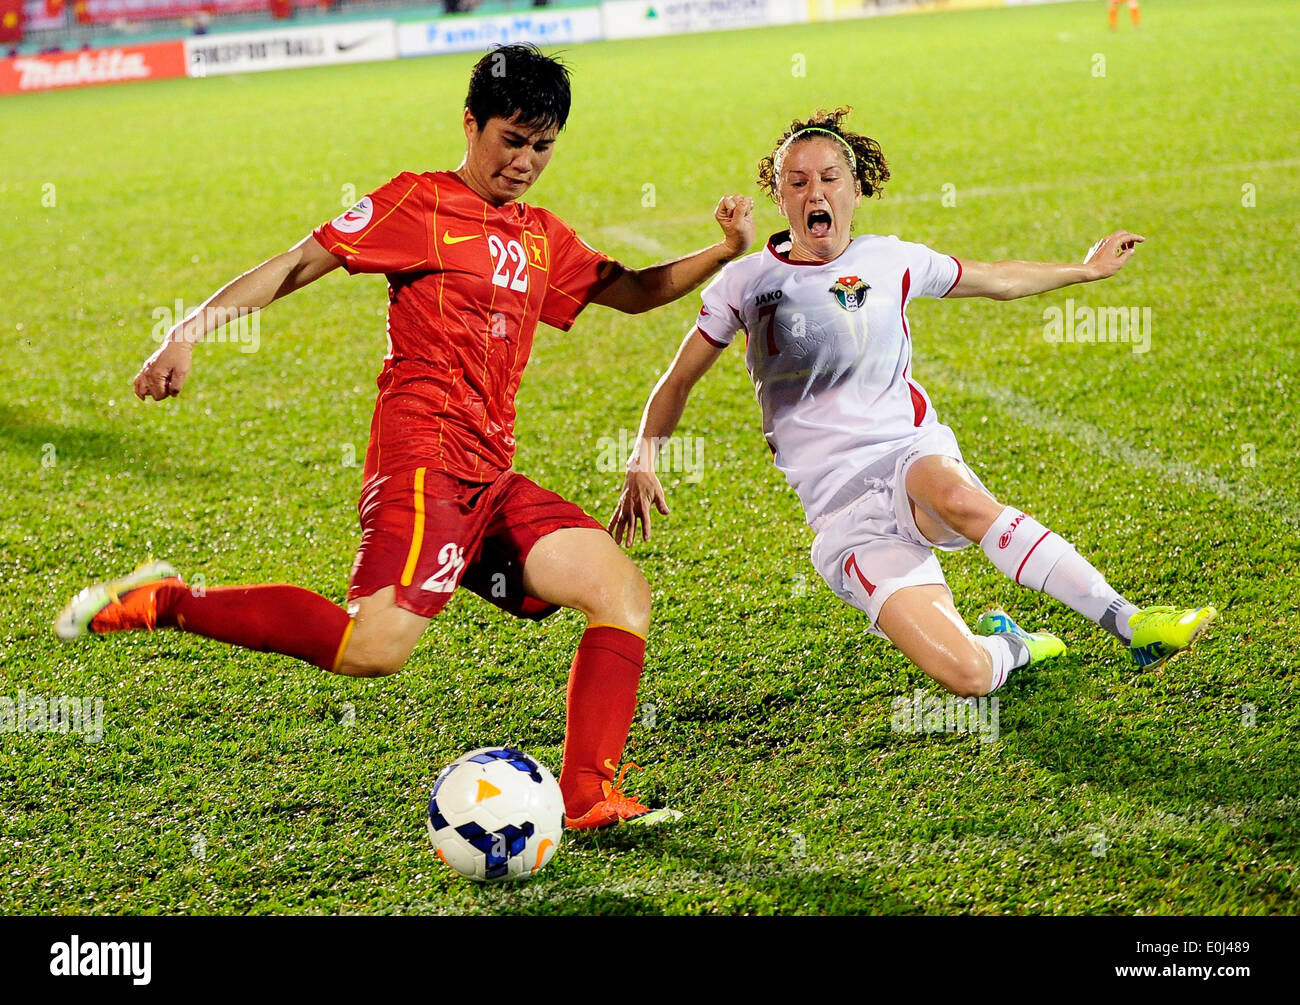 Ho Chi Minh City, Vietnam. 14th May, 2014. Vietnam's Le Thu Thanh Huong (L) vies with Jordan's Yasmeen Salm Hani Khair during their Group A match at the 2014 AFC Women's Asian Cup held at Thong Nhat Stadium in Ho Chi Minh city, Vietnam, May 14, 2014. Vietnam beat Jordan 3-1. © He Jingjia/Xinhua/Alamy Live News Stock Photo